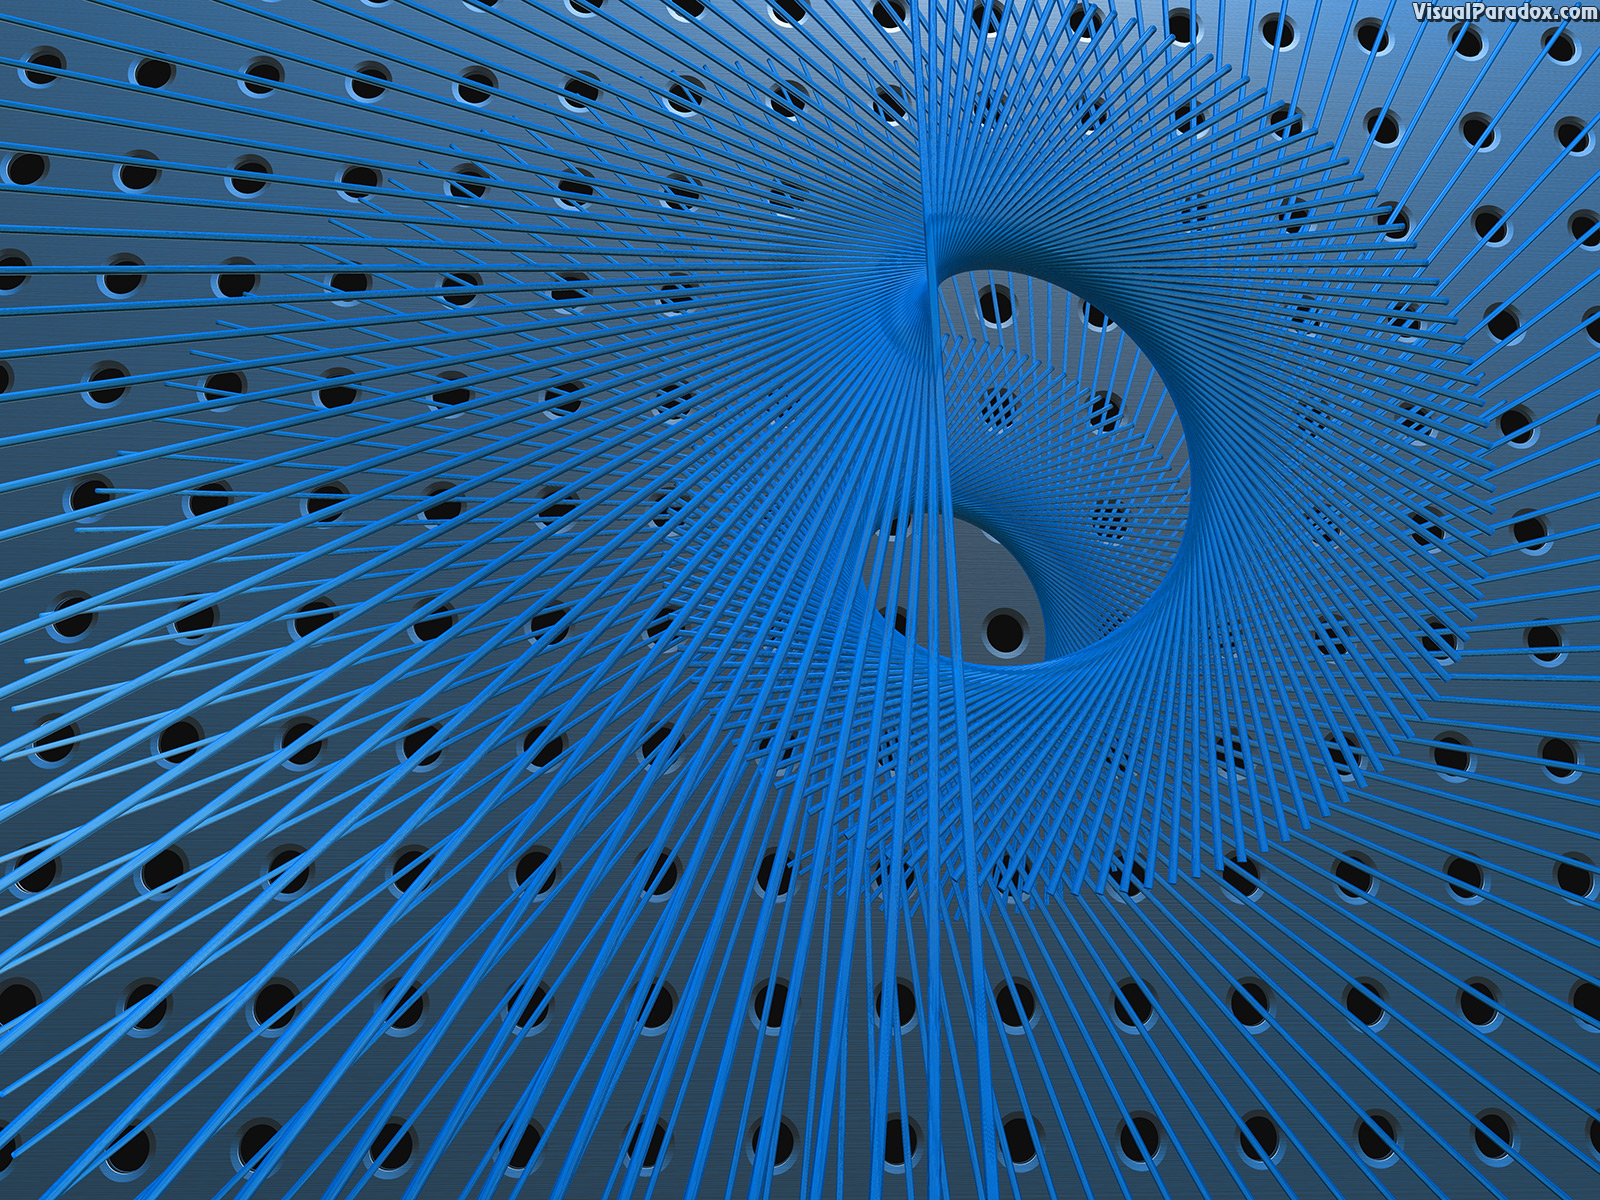 vortex, whirlpool, twist, spin, recursive, medal, plate, grill, grid, stereo, speaker, holes, abstract, 3d, wallpaper